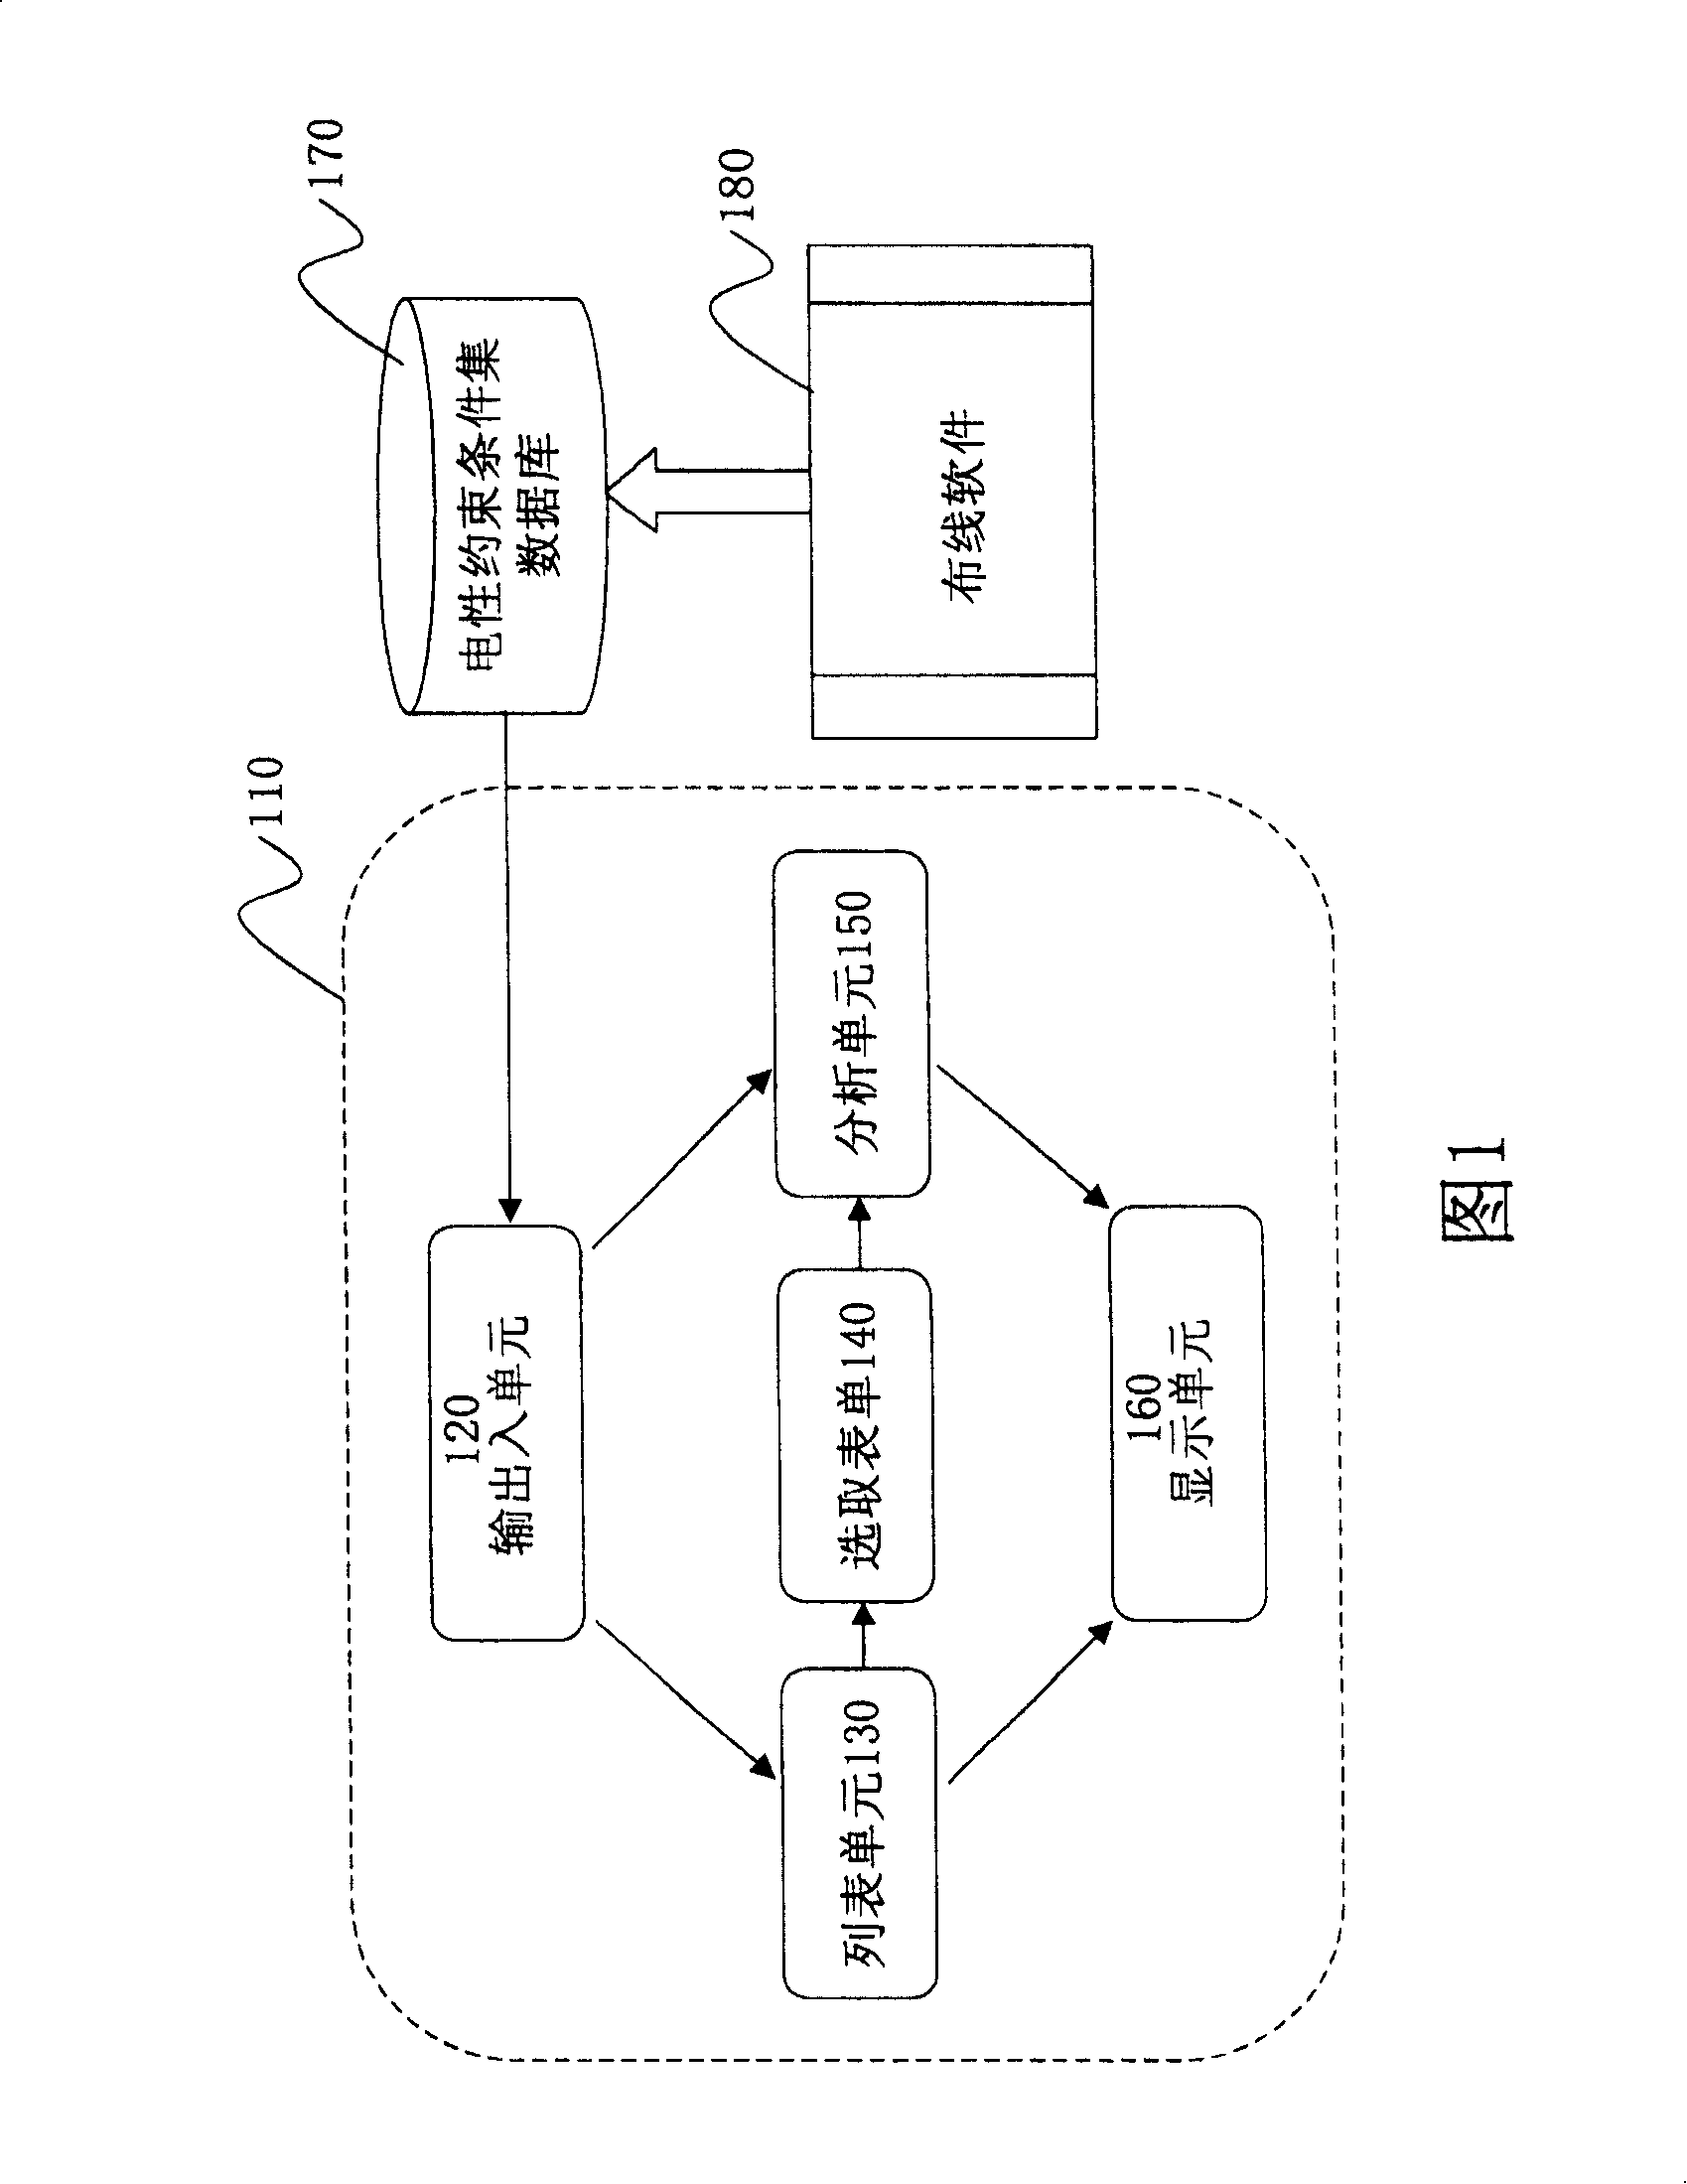 Windows operating interface and method of graphically modifying electrical constraint condition set